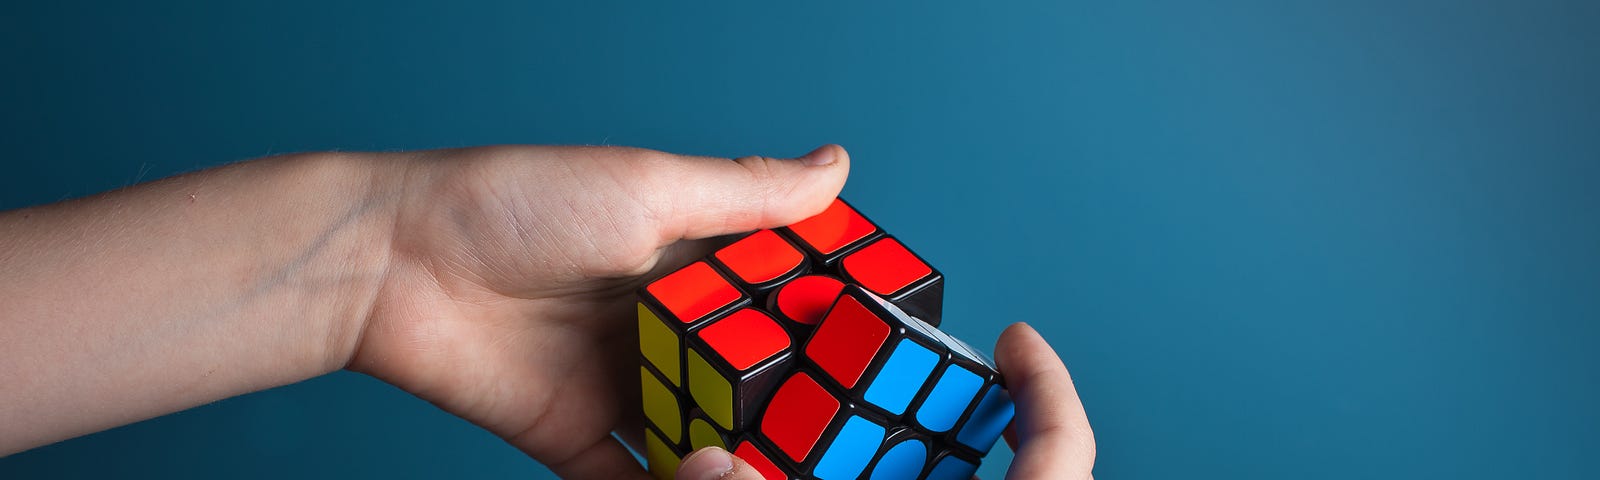 Hands completing a Rubiks cube